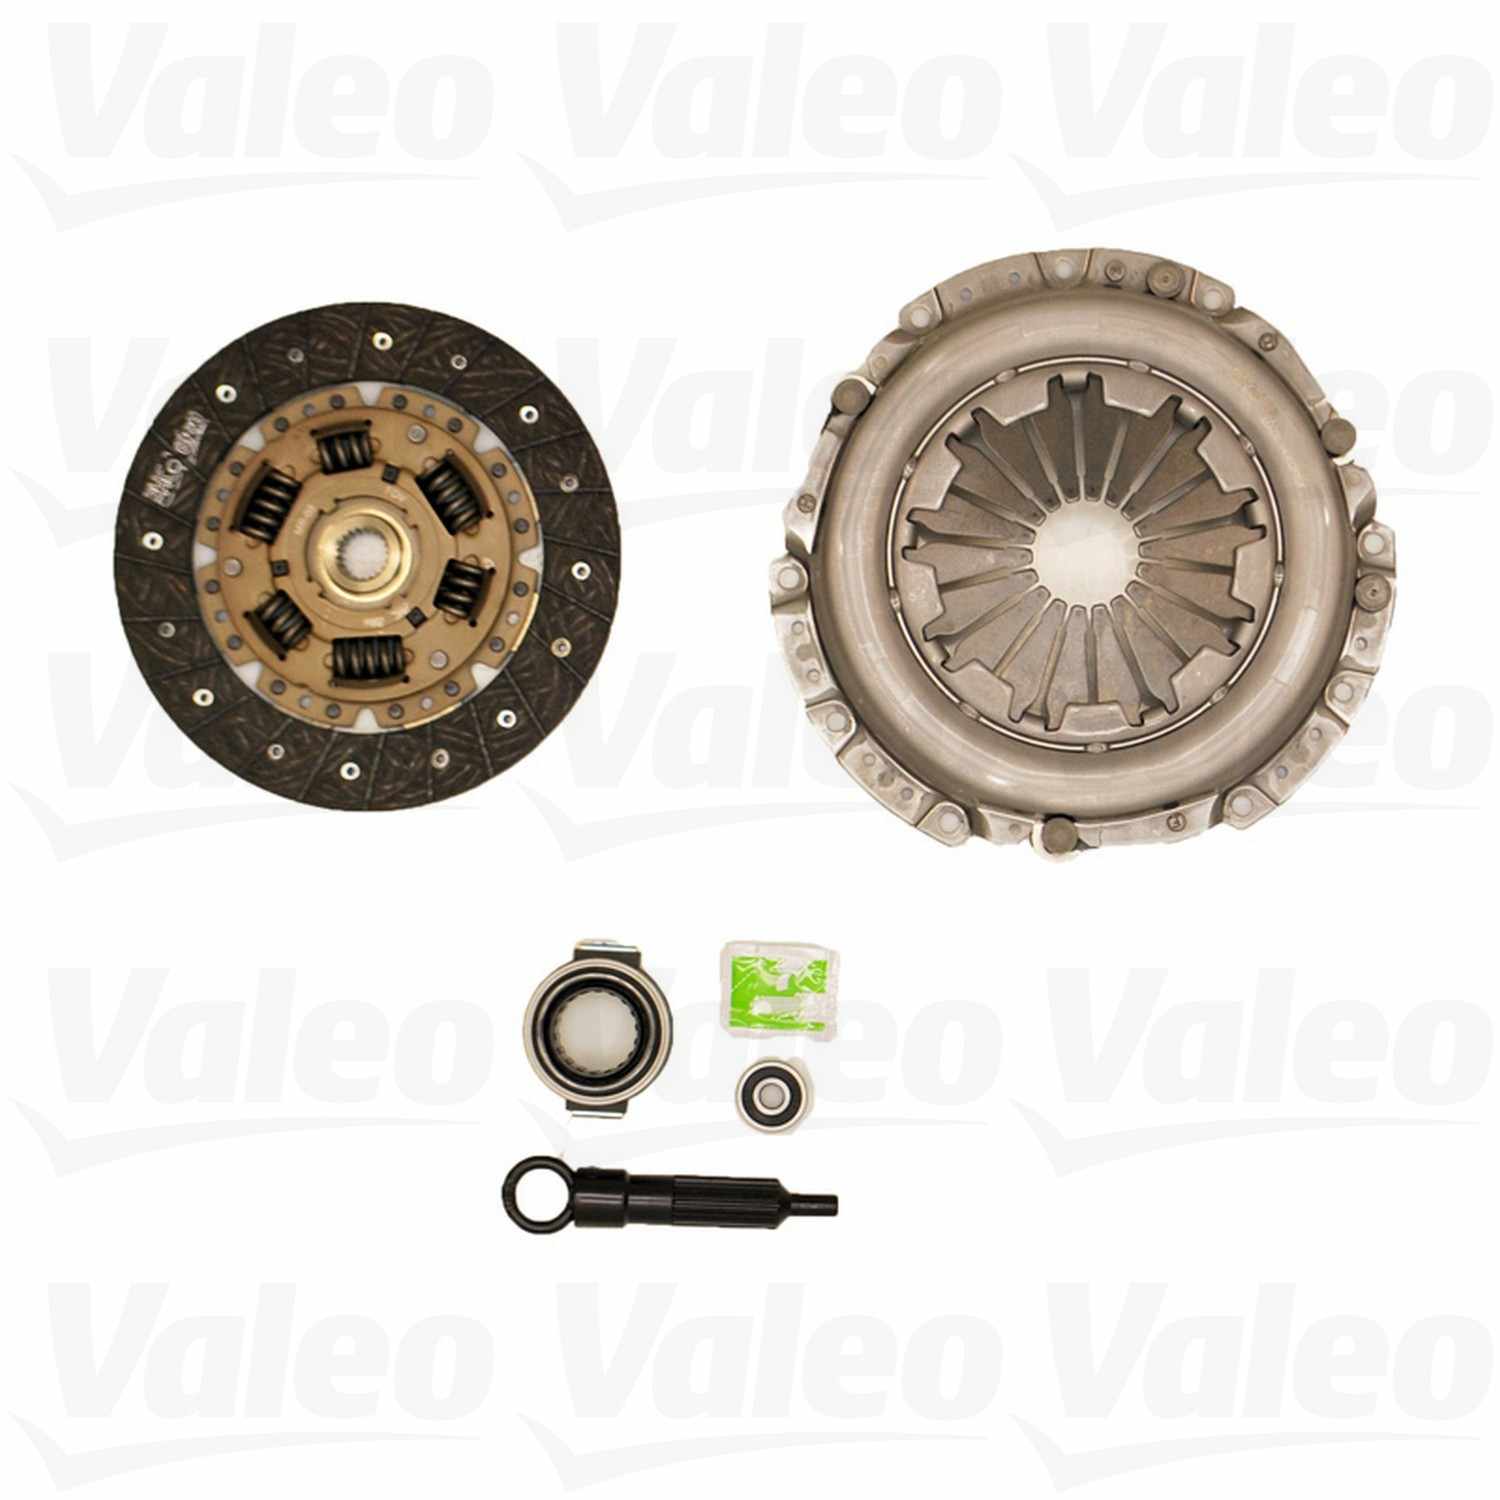 Front View of Transmission Clutch Kit VALEO 52152201